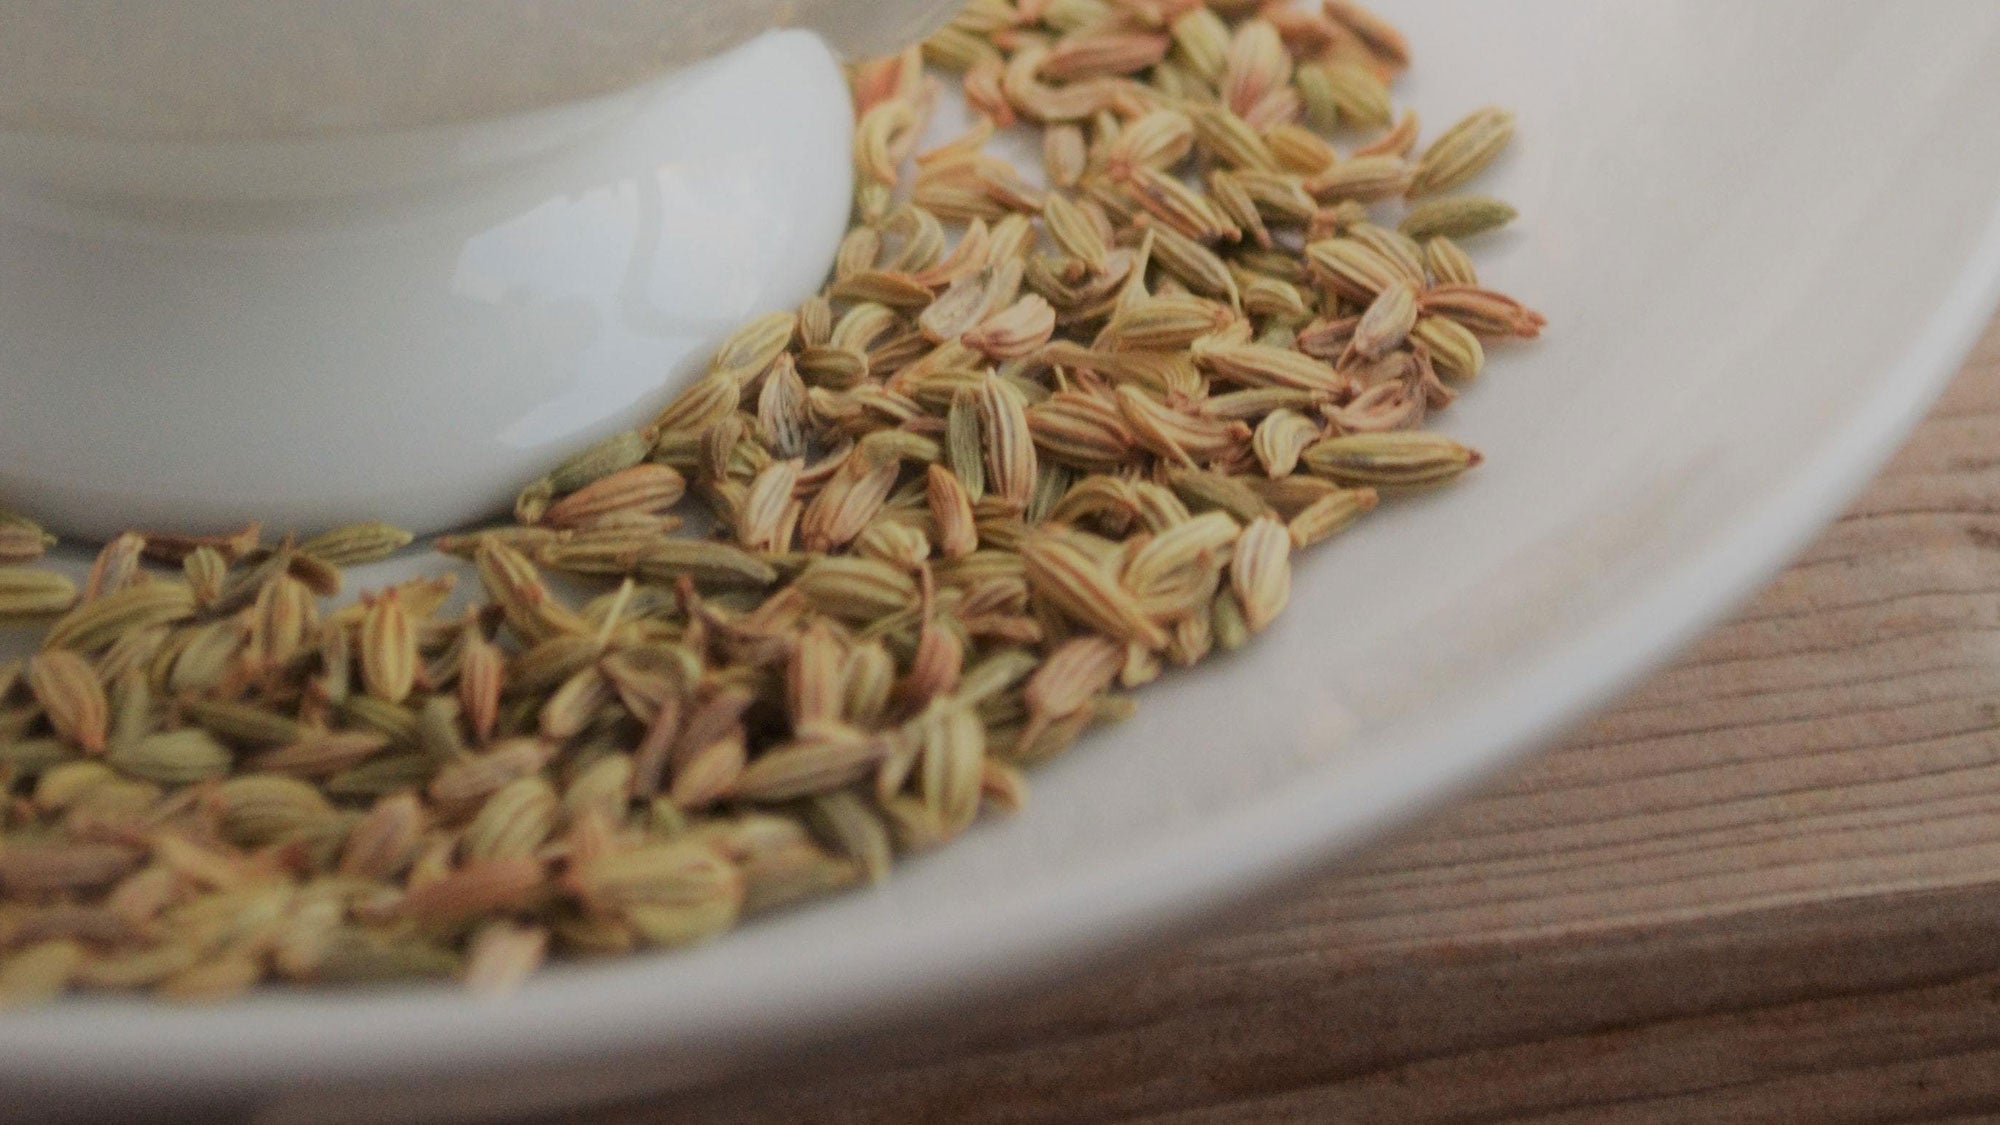 Fennel as Food And Medicine